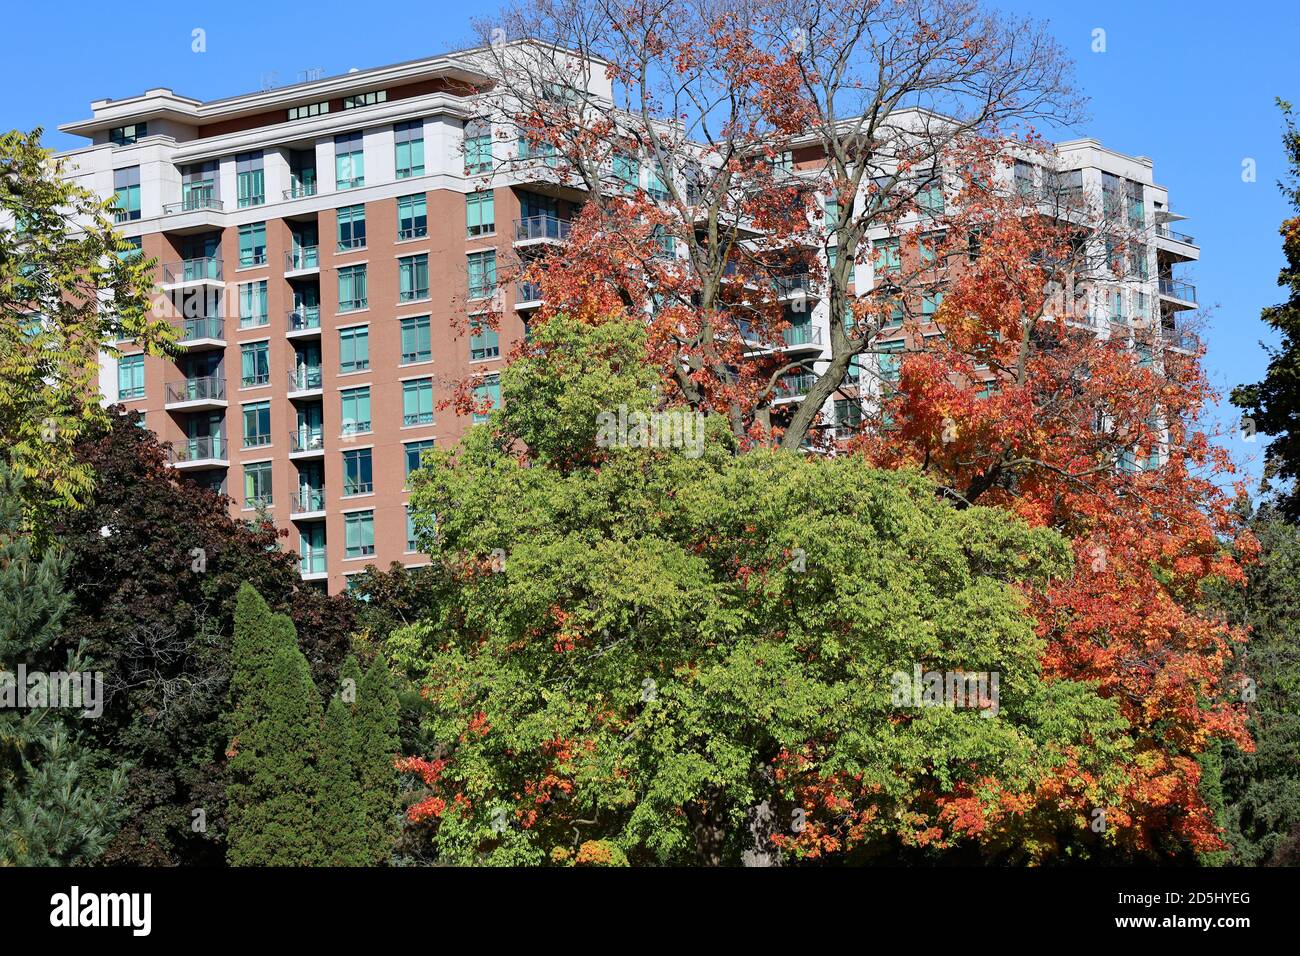 Large apartment building surrounded by trees in fall colors Stock Photo